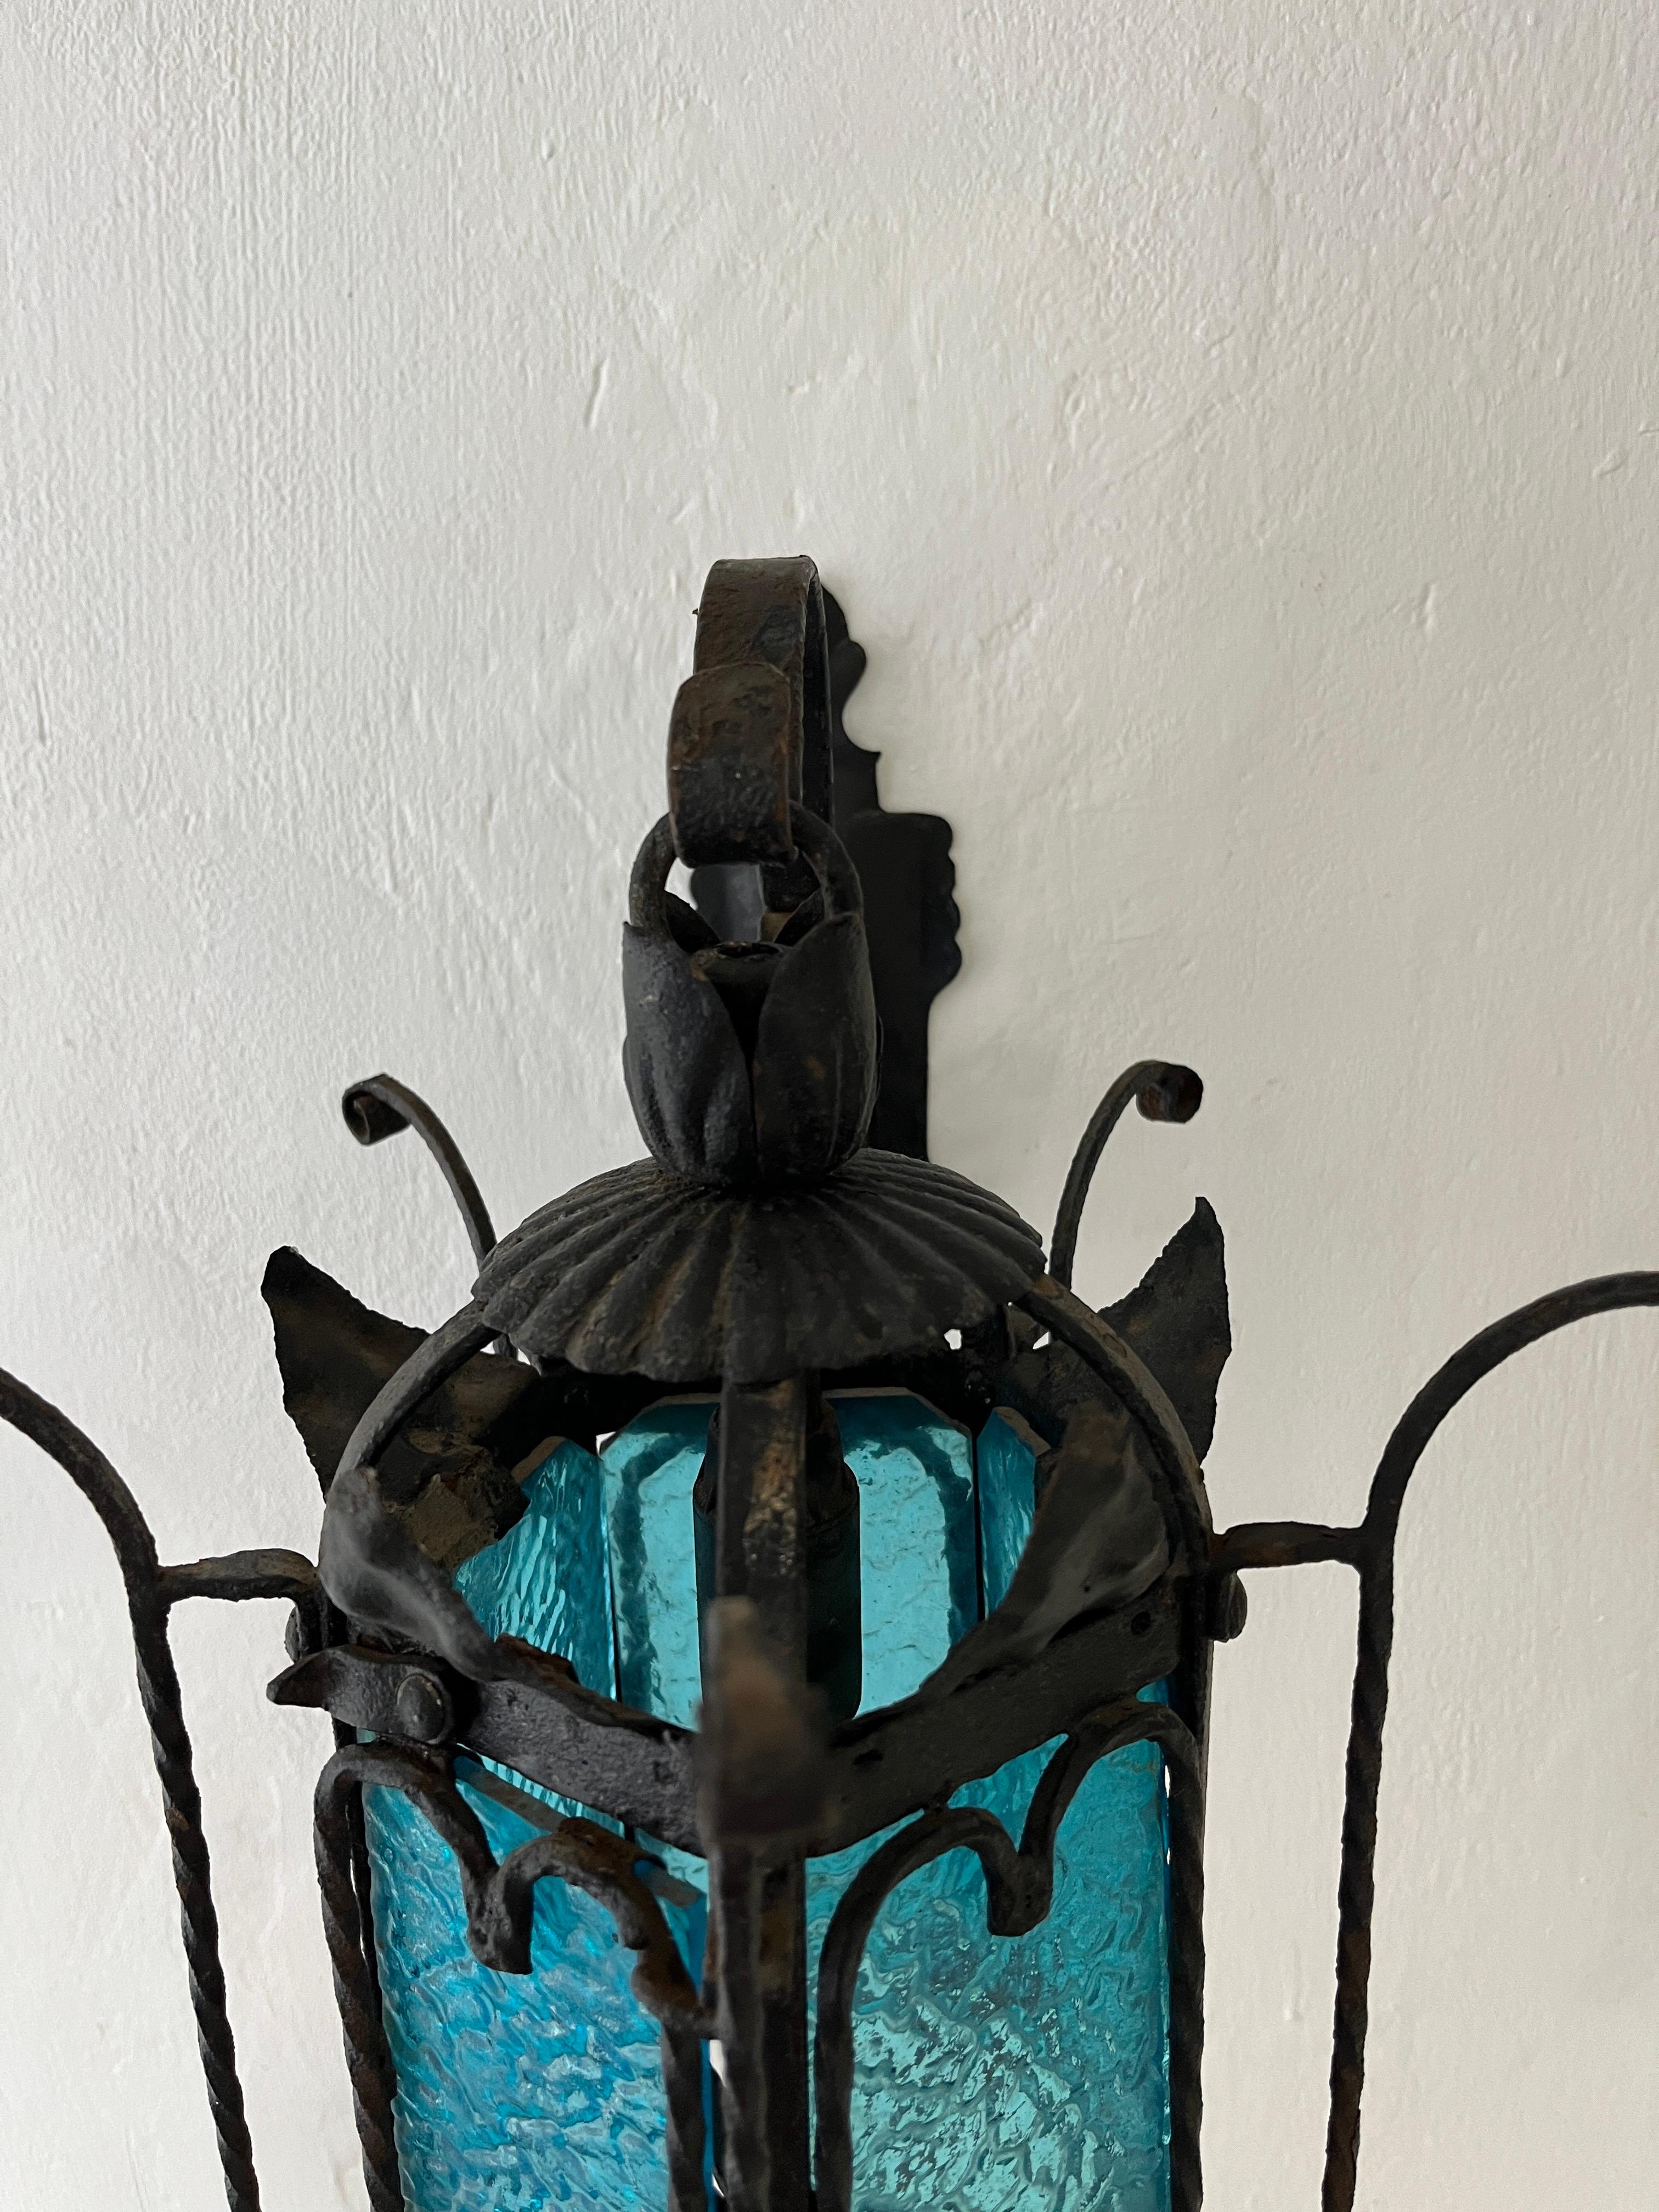 Venetian Murano Blue Aqua Glass Lanterns Wrought Iron Sconces, c 1890 In Good Condition For Sale In Firenze, Toscana